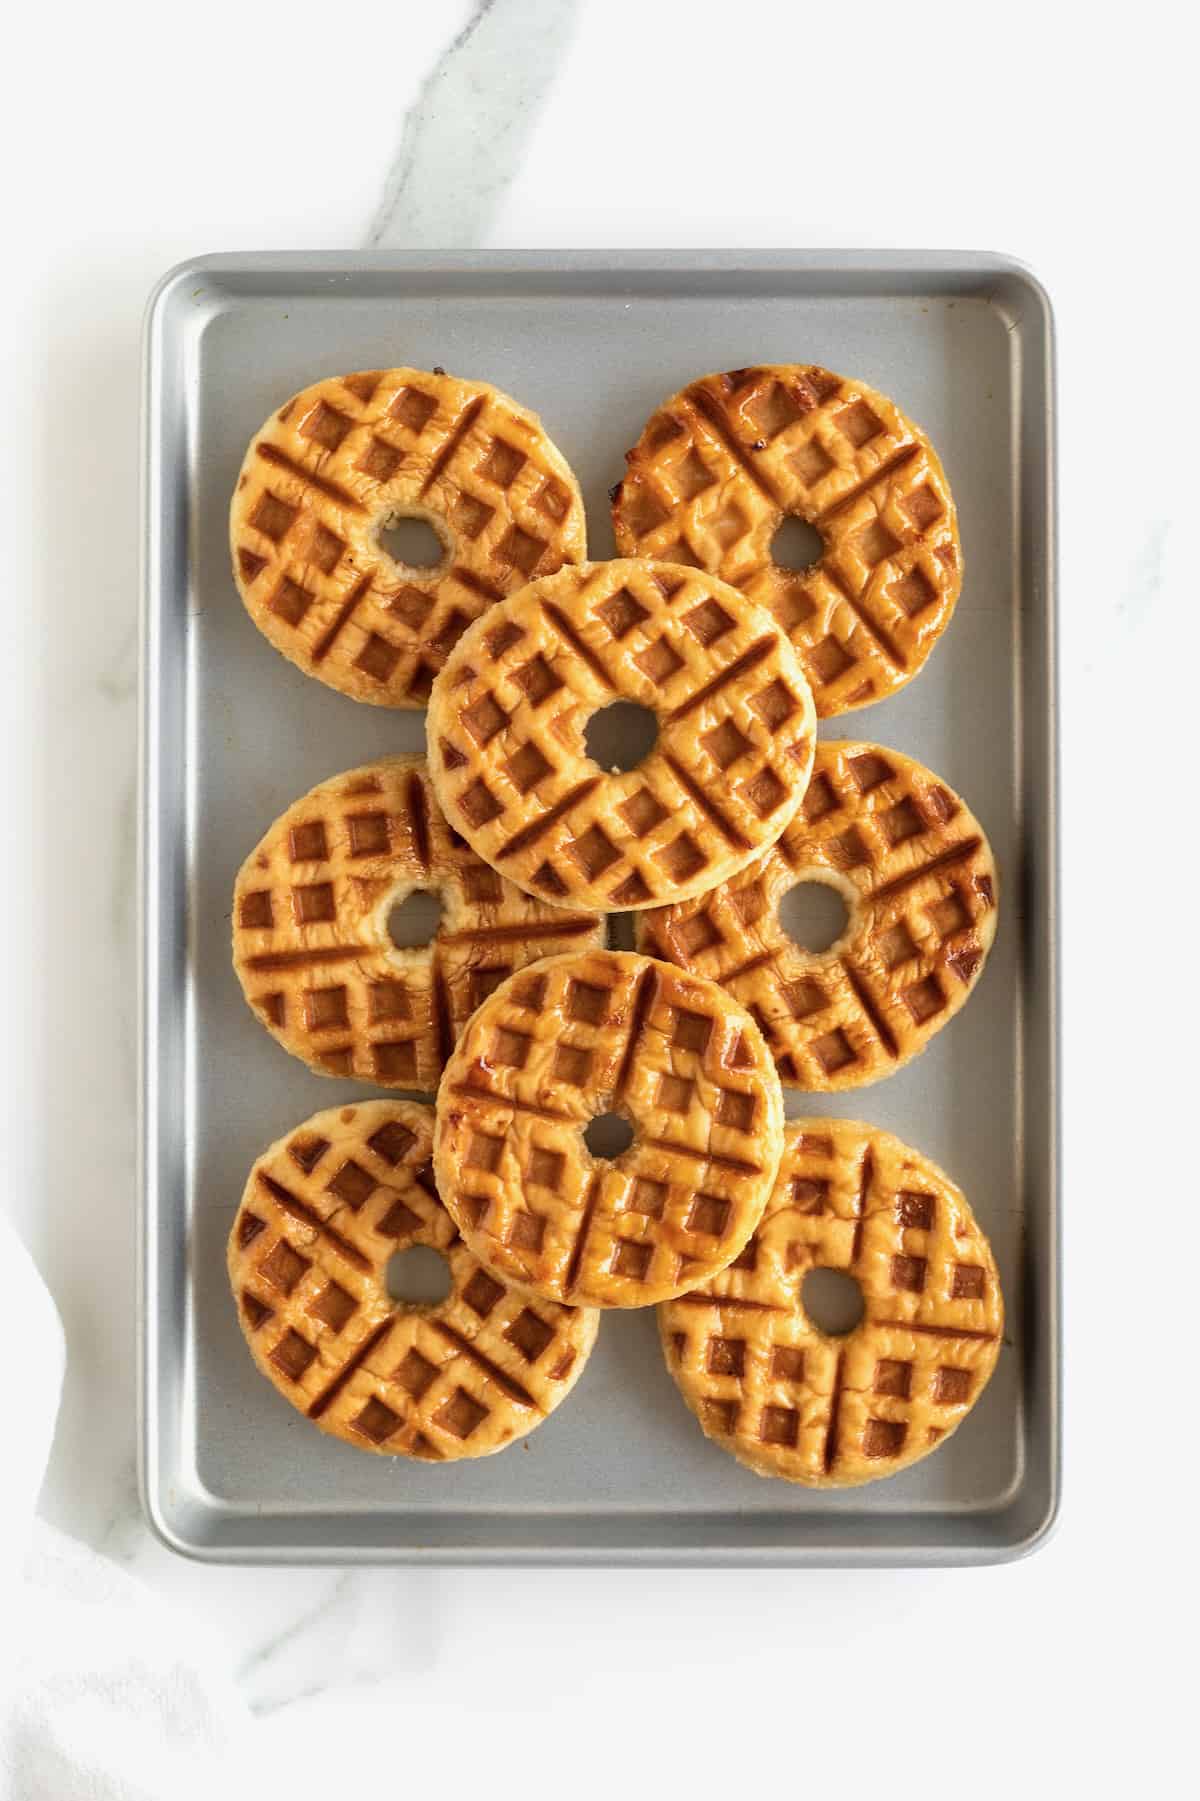 A baking tray filled with 8 hot donut waffles.